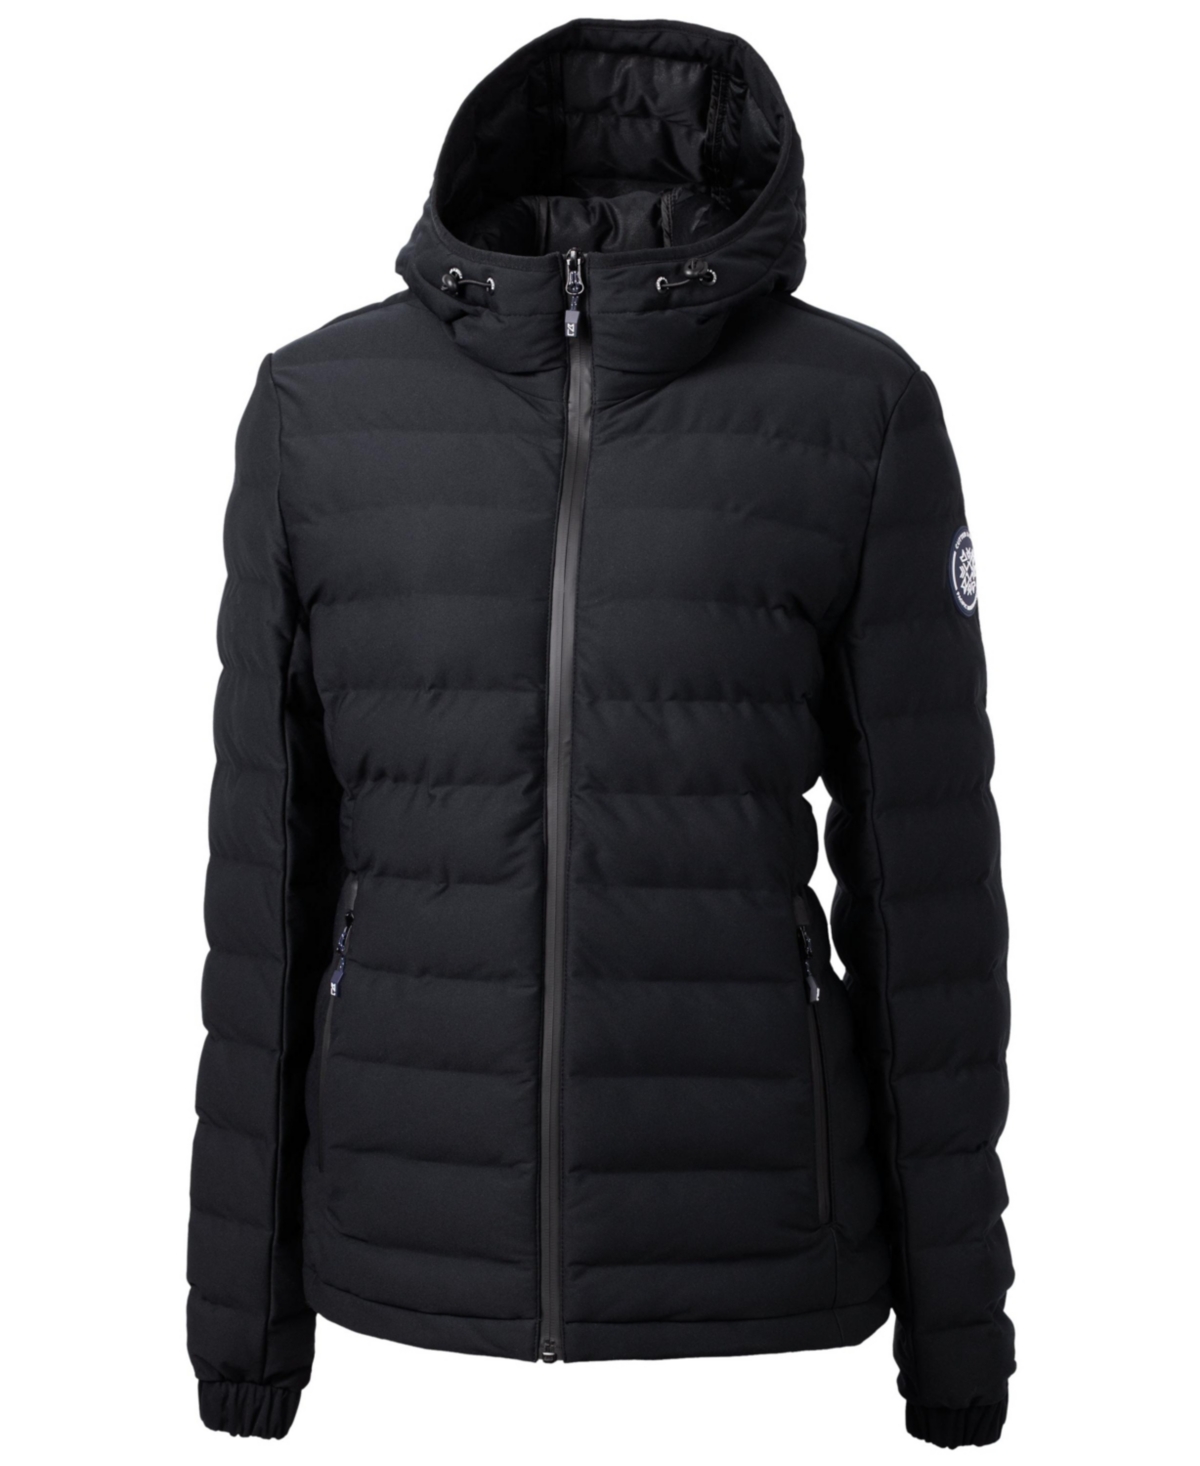 Mission Ridge Repreve Eco Insulated Womens Puffer Jacket - Navy blue